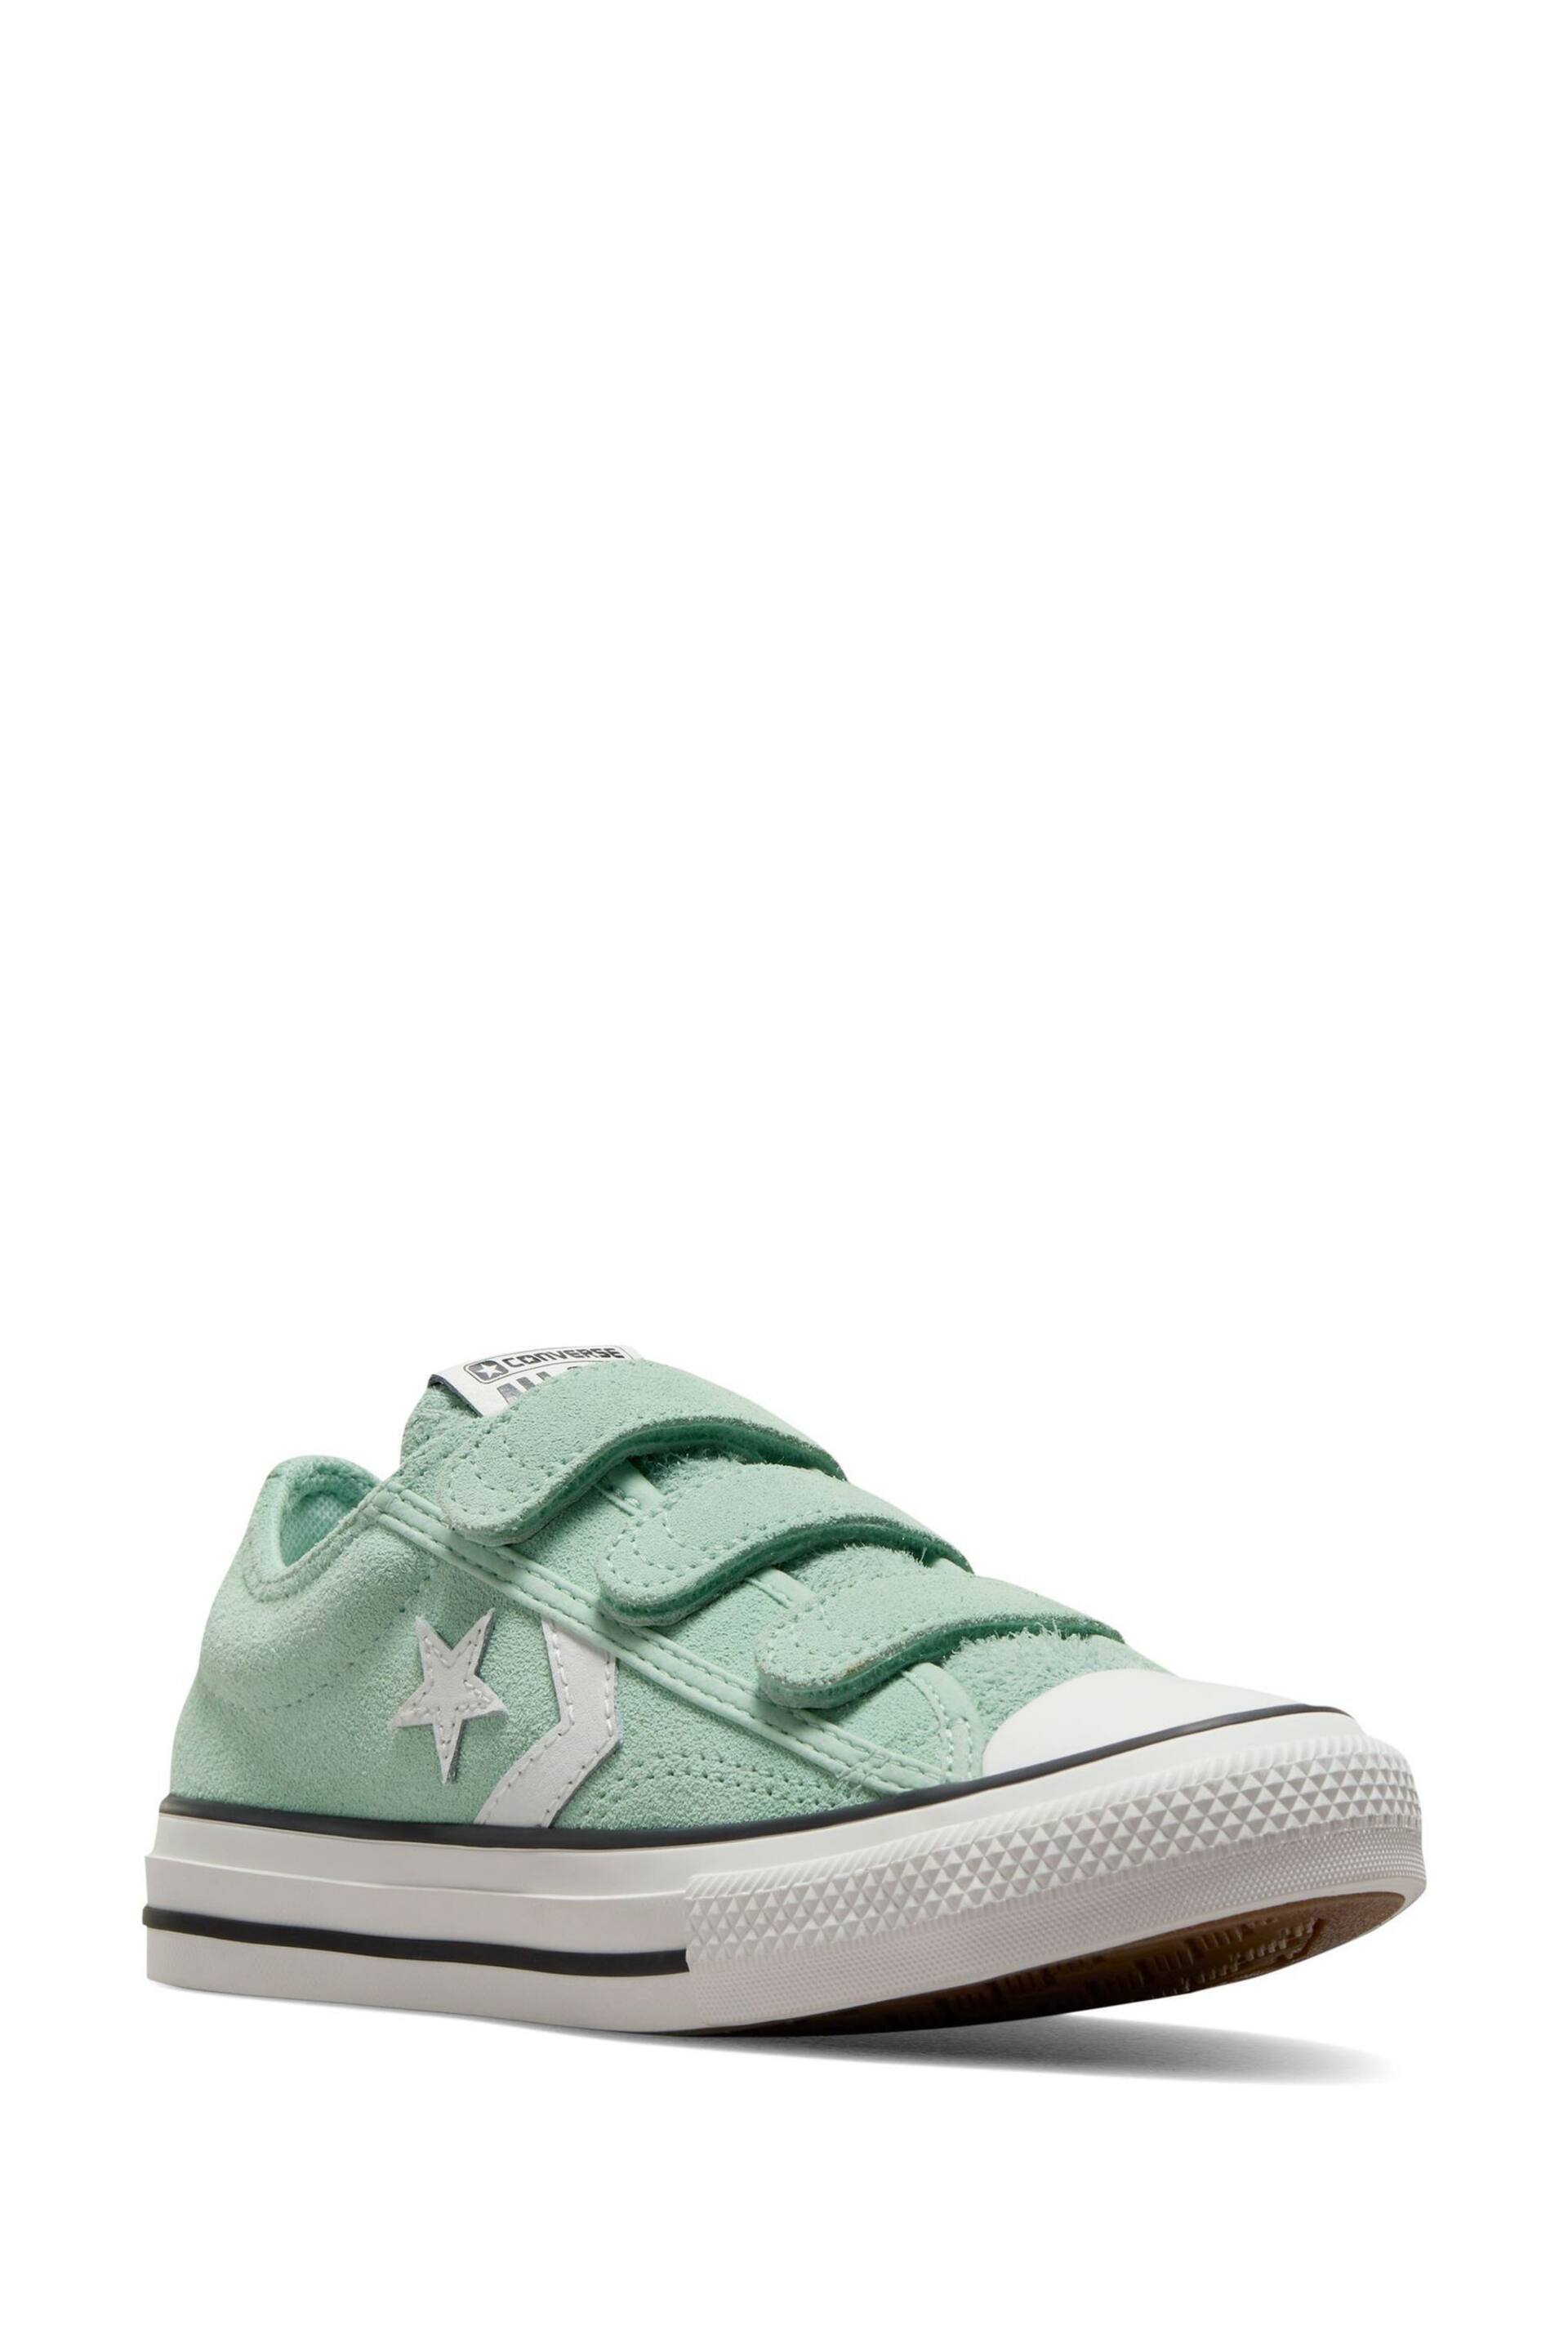 Converse Green Junior Star Player 76 3V Trainers - Image 3 of 9